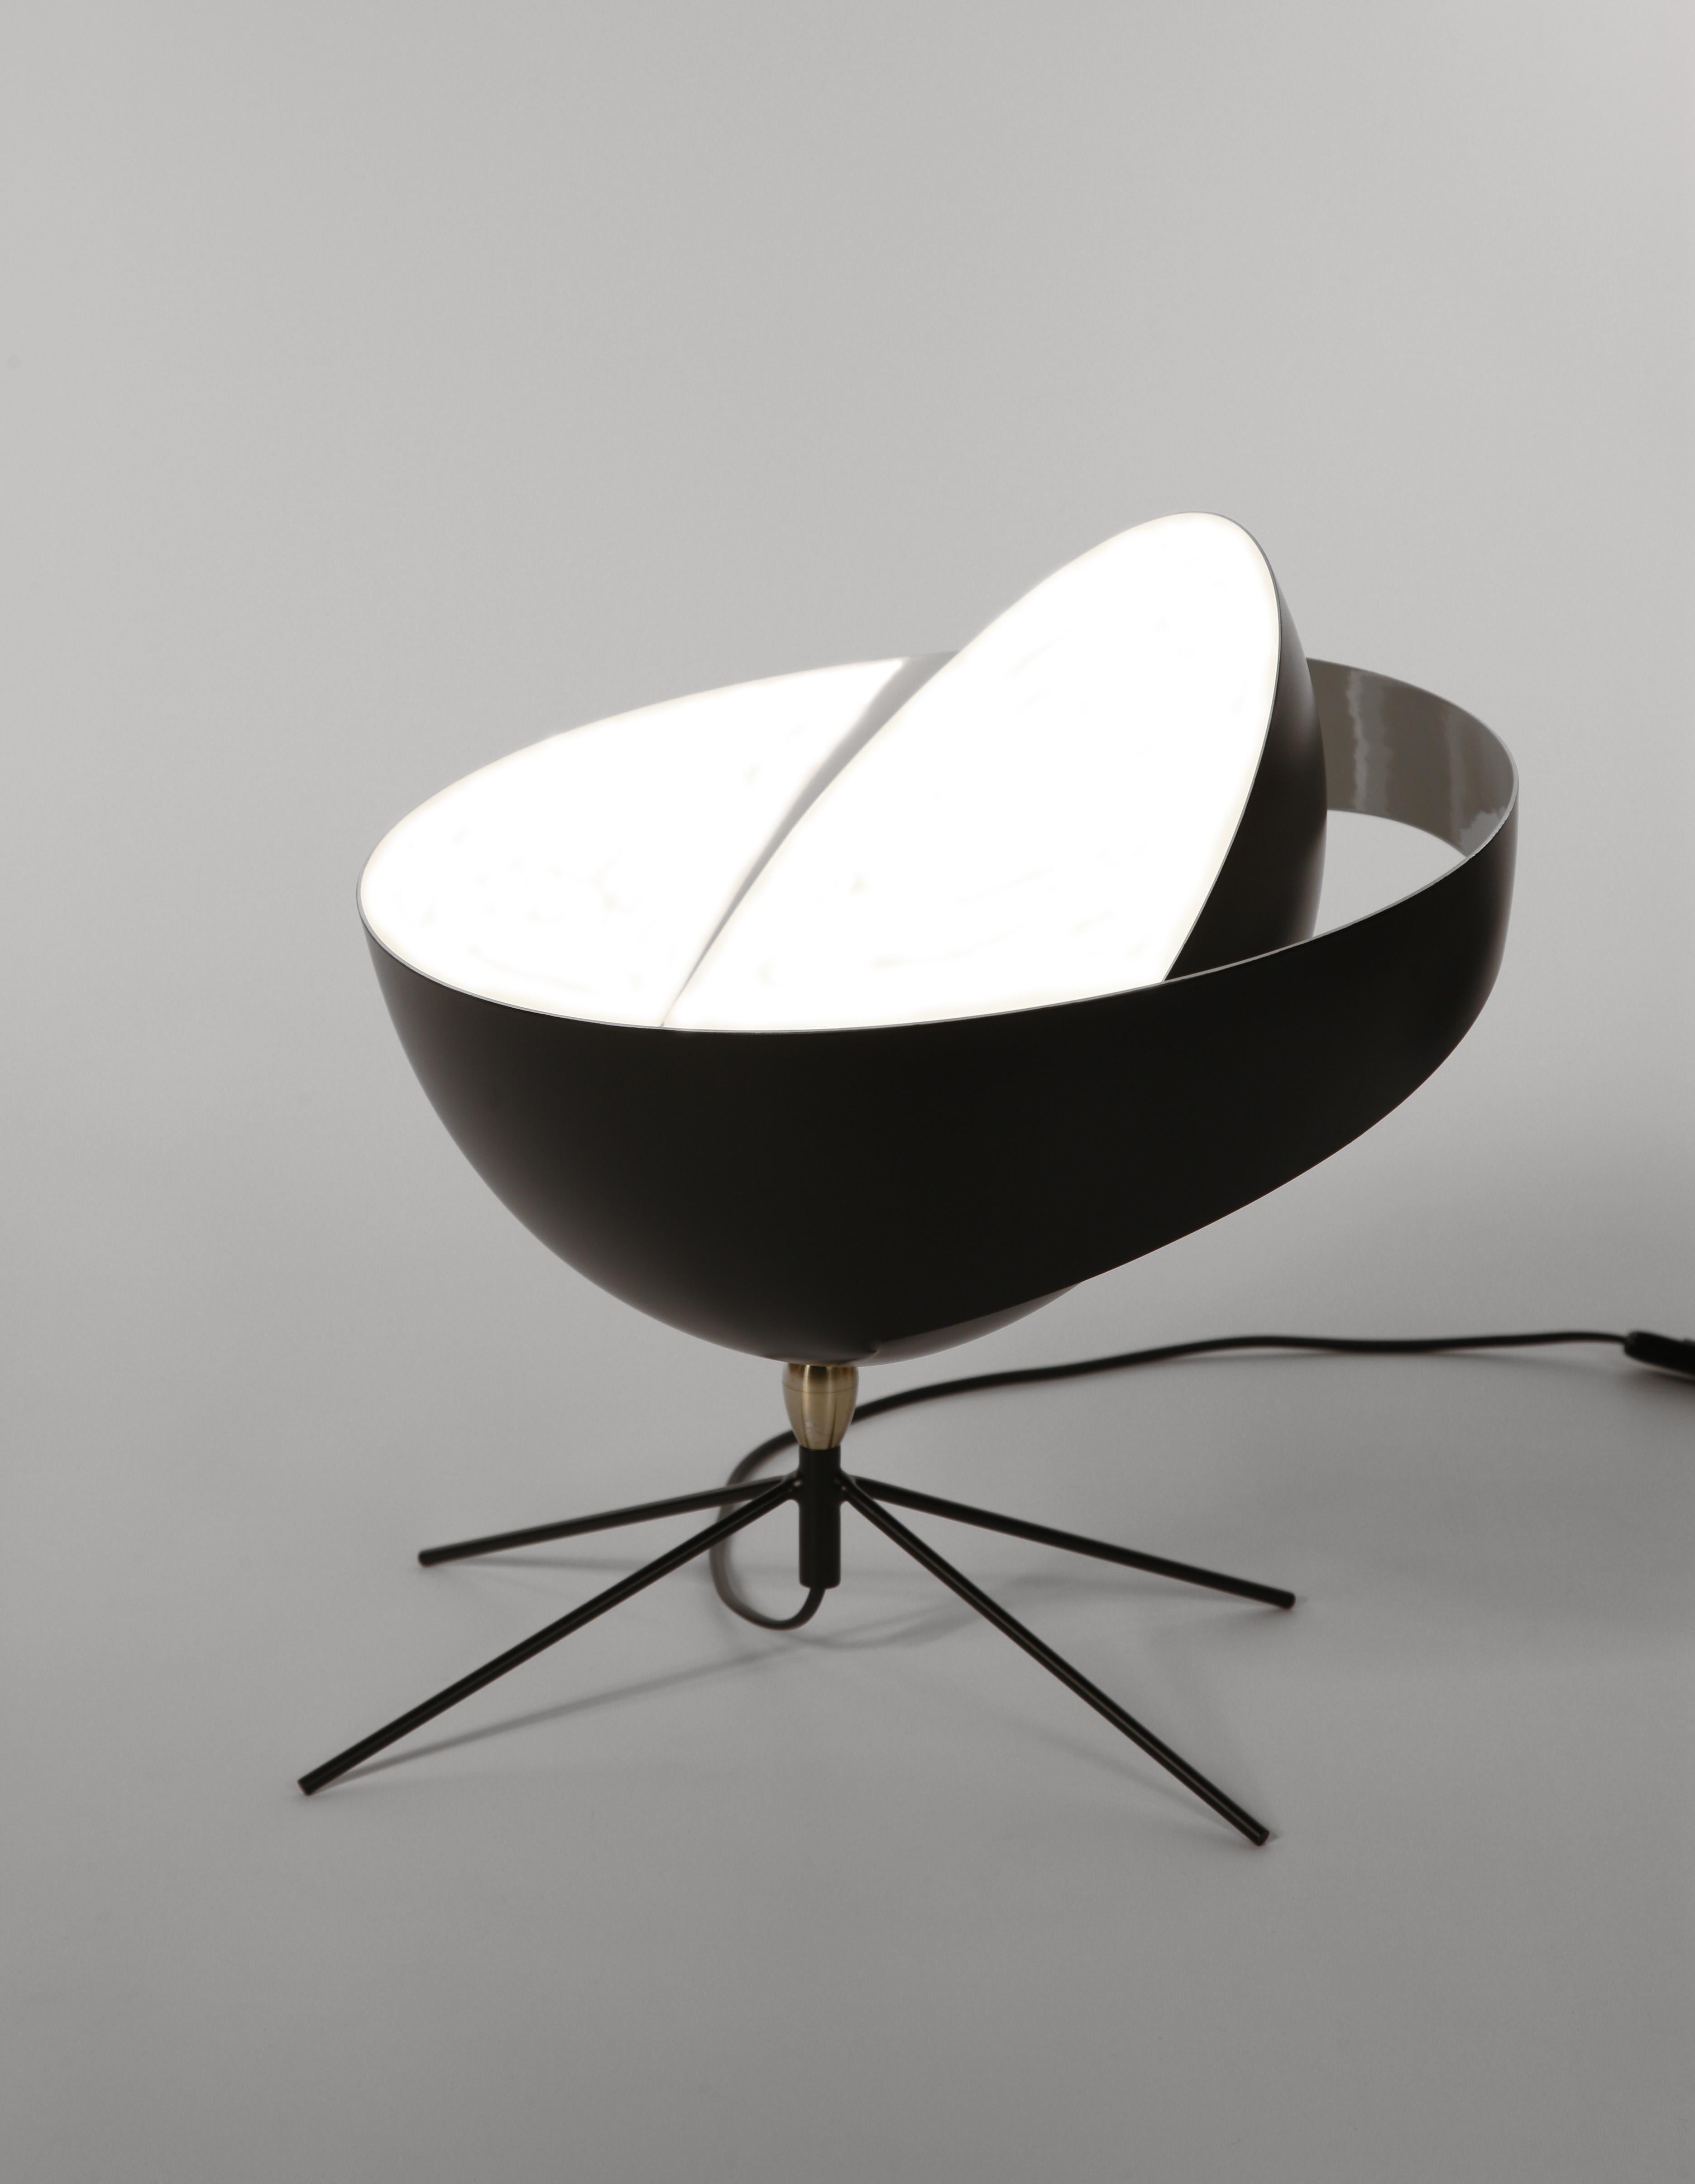 Contemporary Serge Mouille Mid-Century Modern Black Saturn Table Lamp For Sale